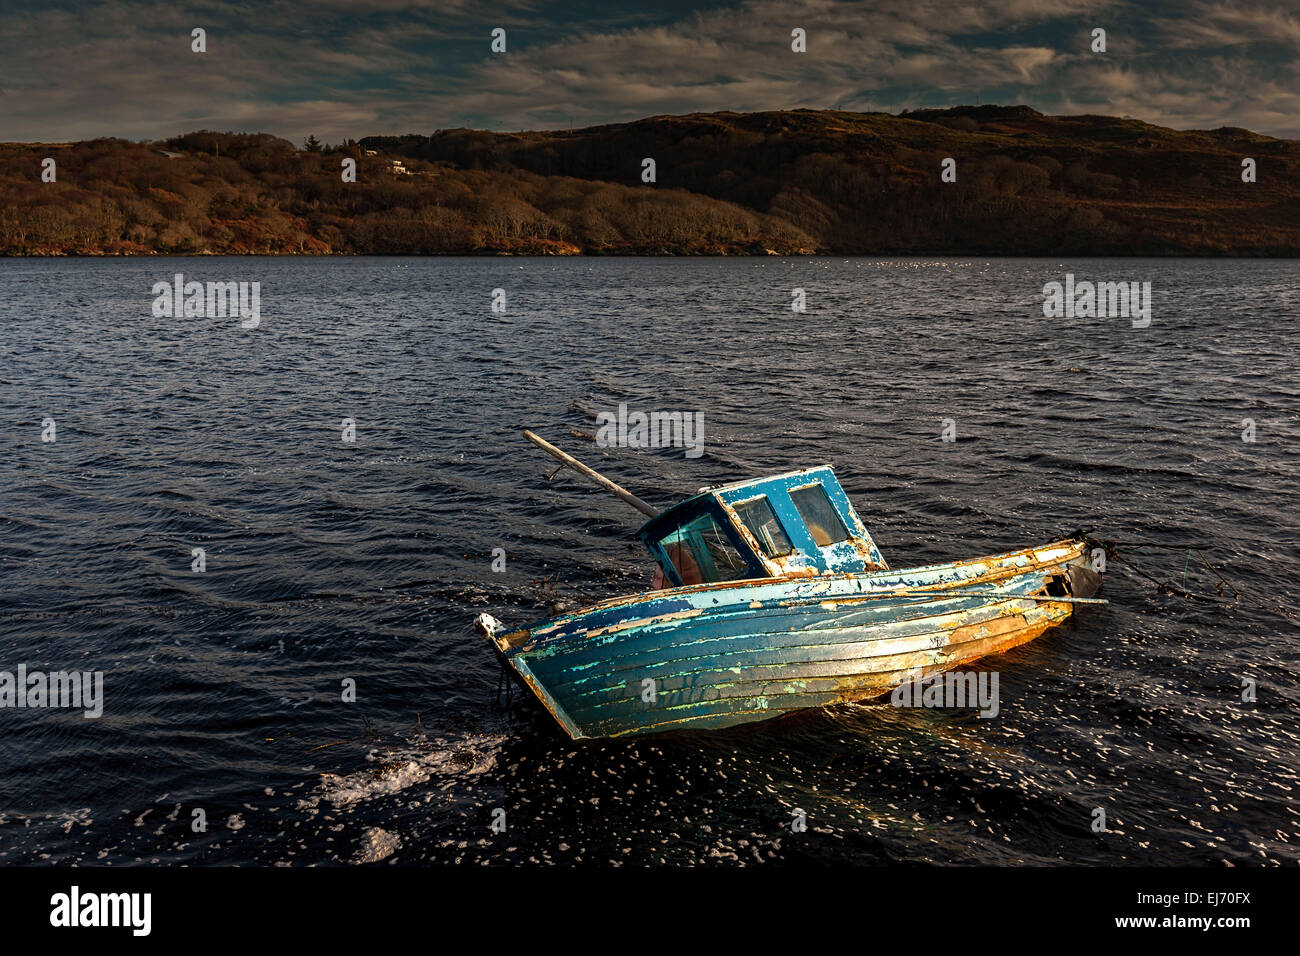 Partially submerged old wooden boat in bay, near Killybegs, County Donegal, Republic of Ireland, Europe. Stock Photo